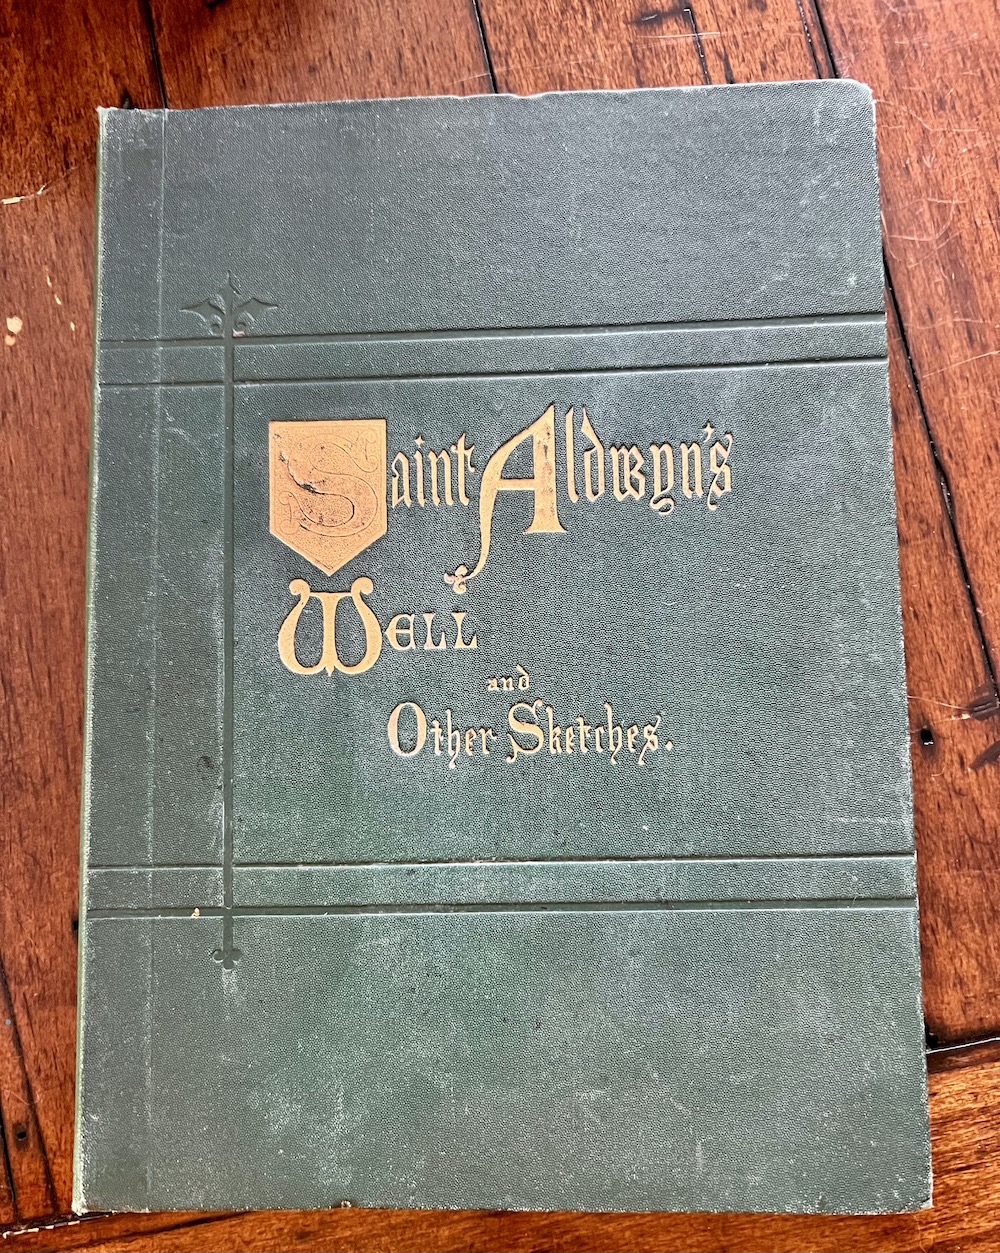 An ald poetry and sketch book called Saint Aldwyn's Well